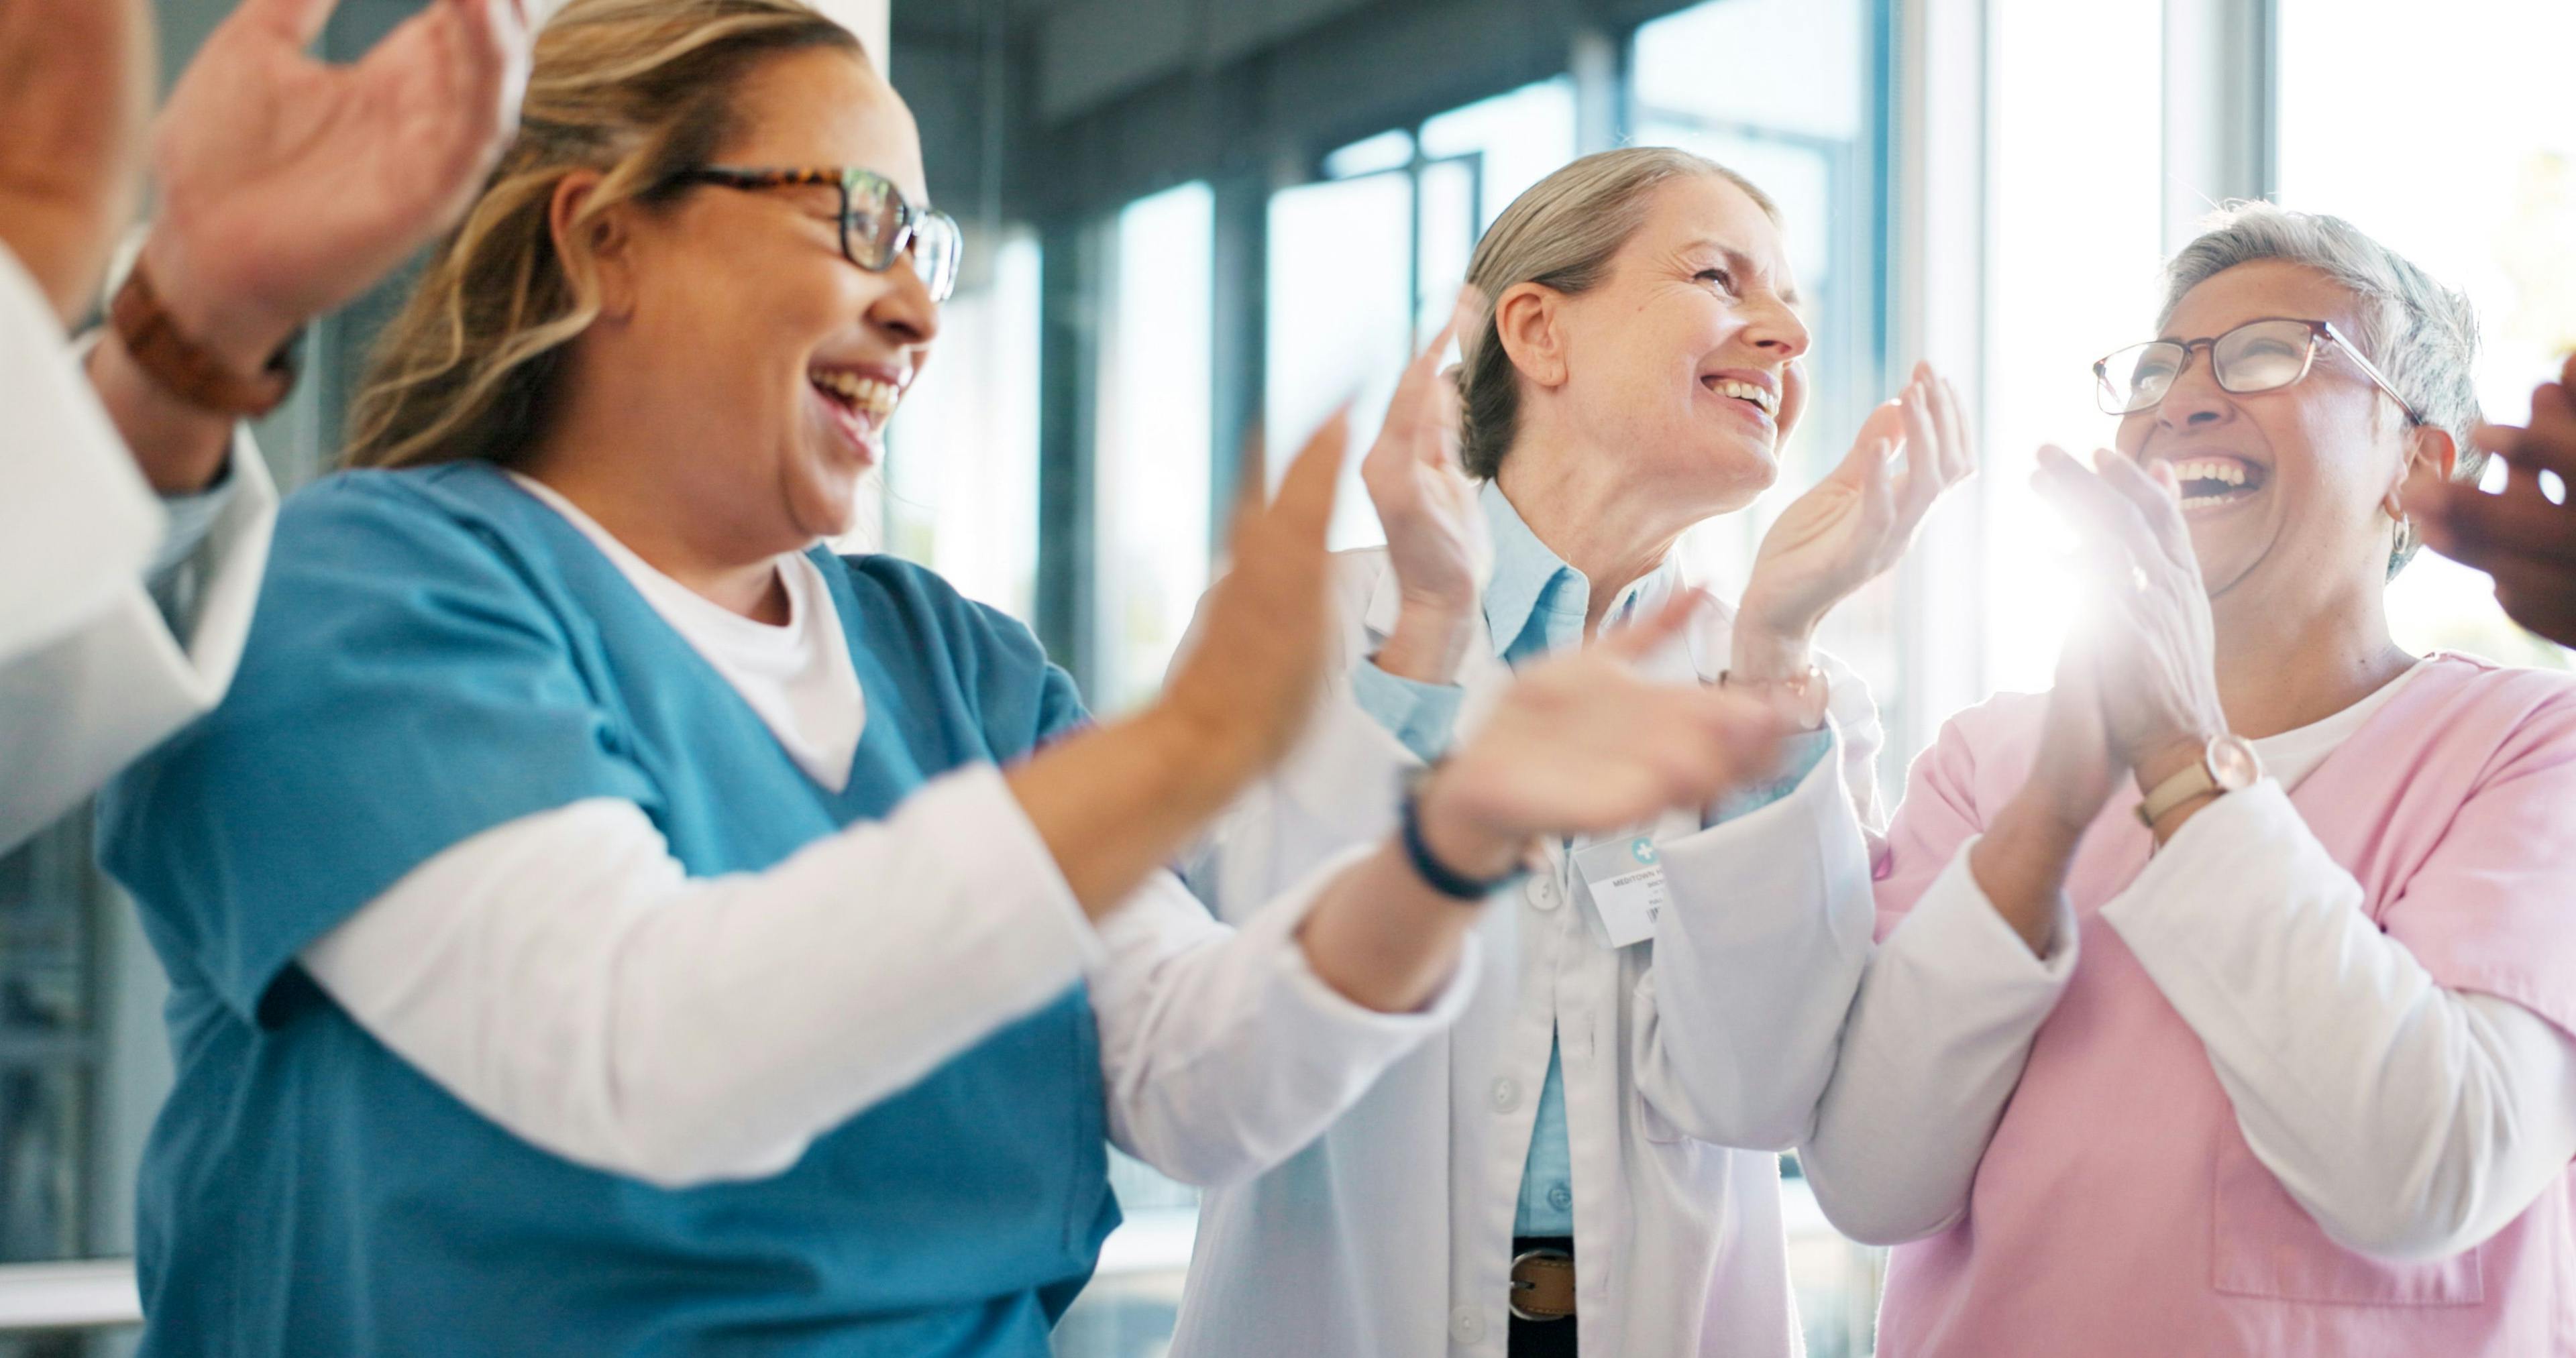 Physicians applauding and supporting team | Image credit: Nina Lawrenson/peopleimages.com - stock.adobe.com